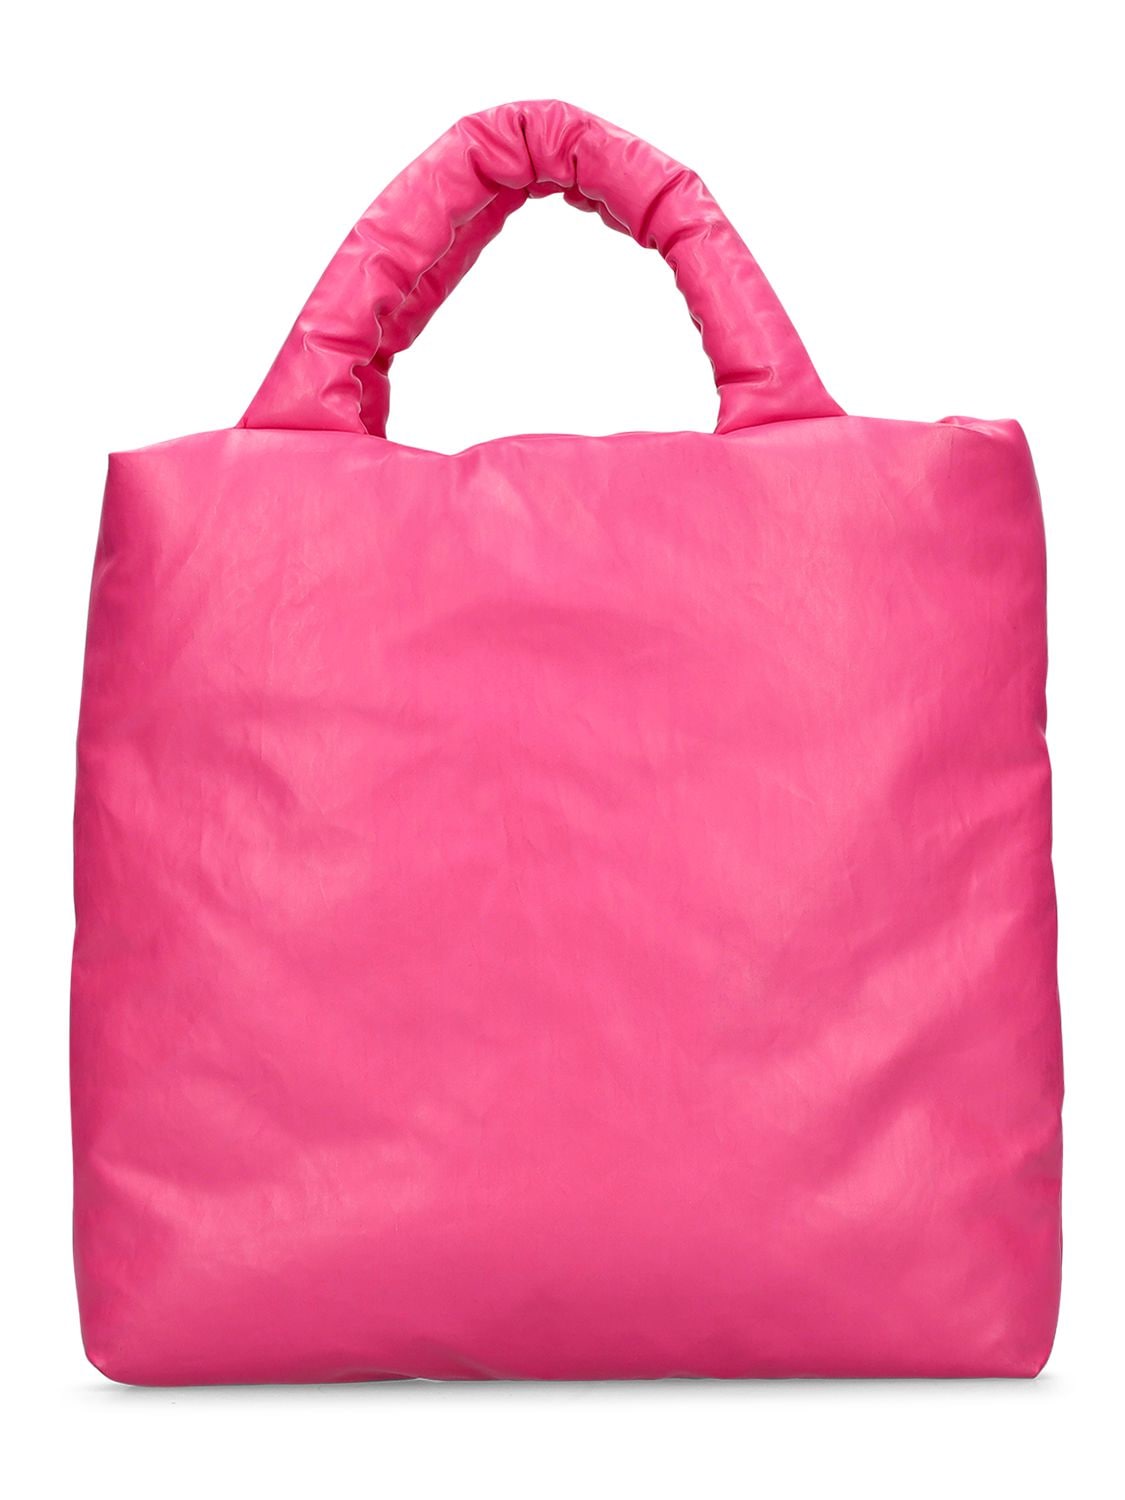 Kassl Editions Pillow Small Oil Cotton Blend Tote Bag In Bright Pink